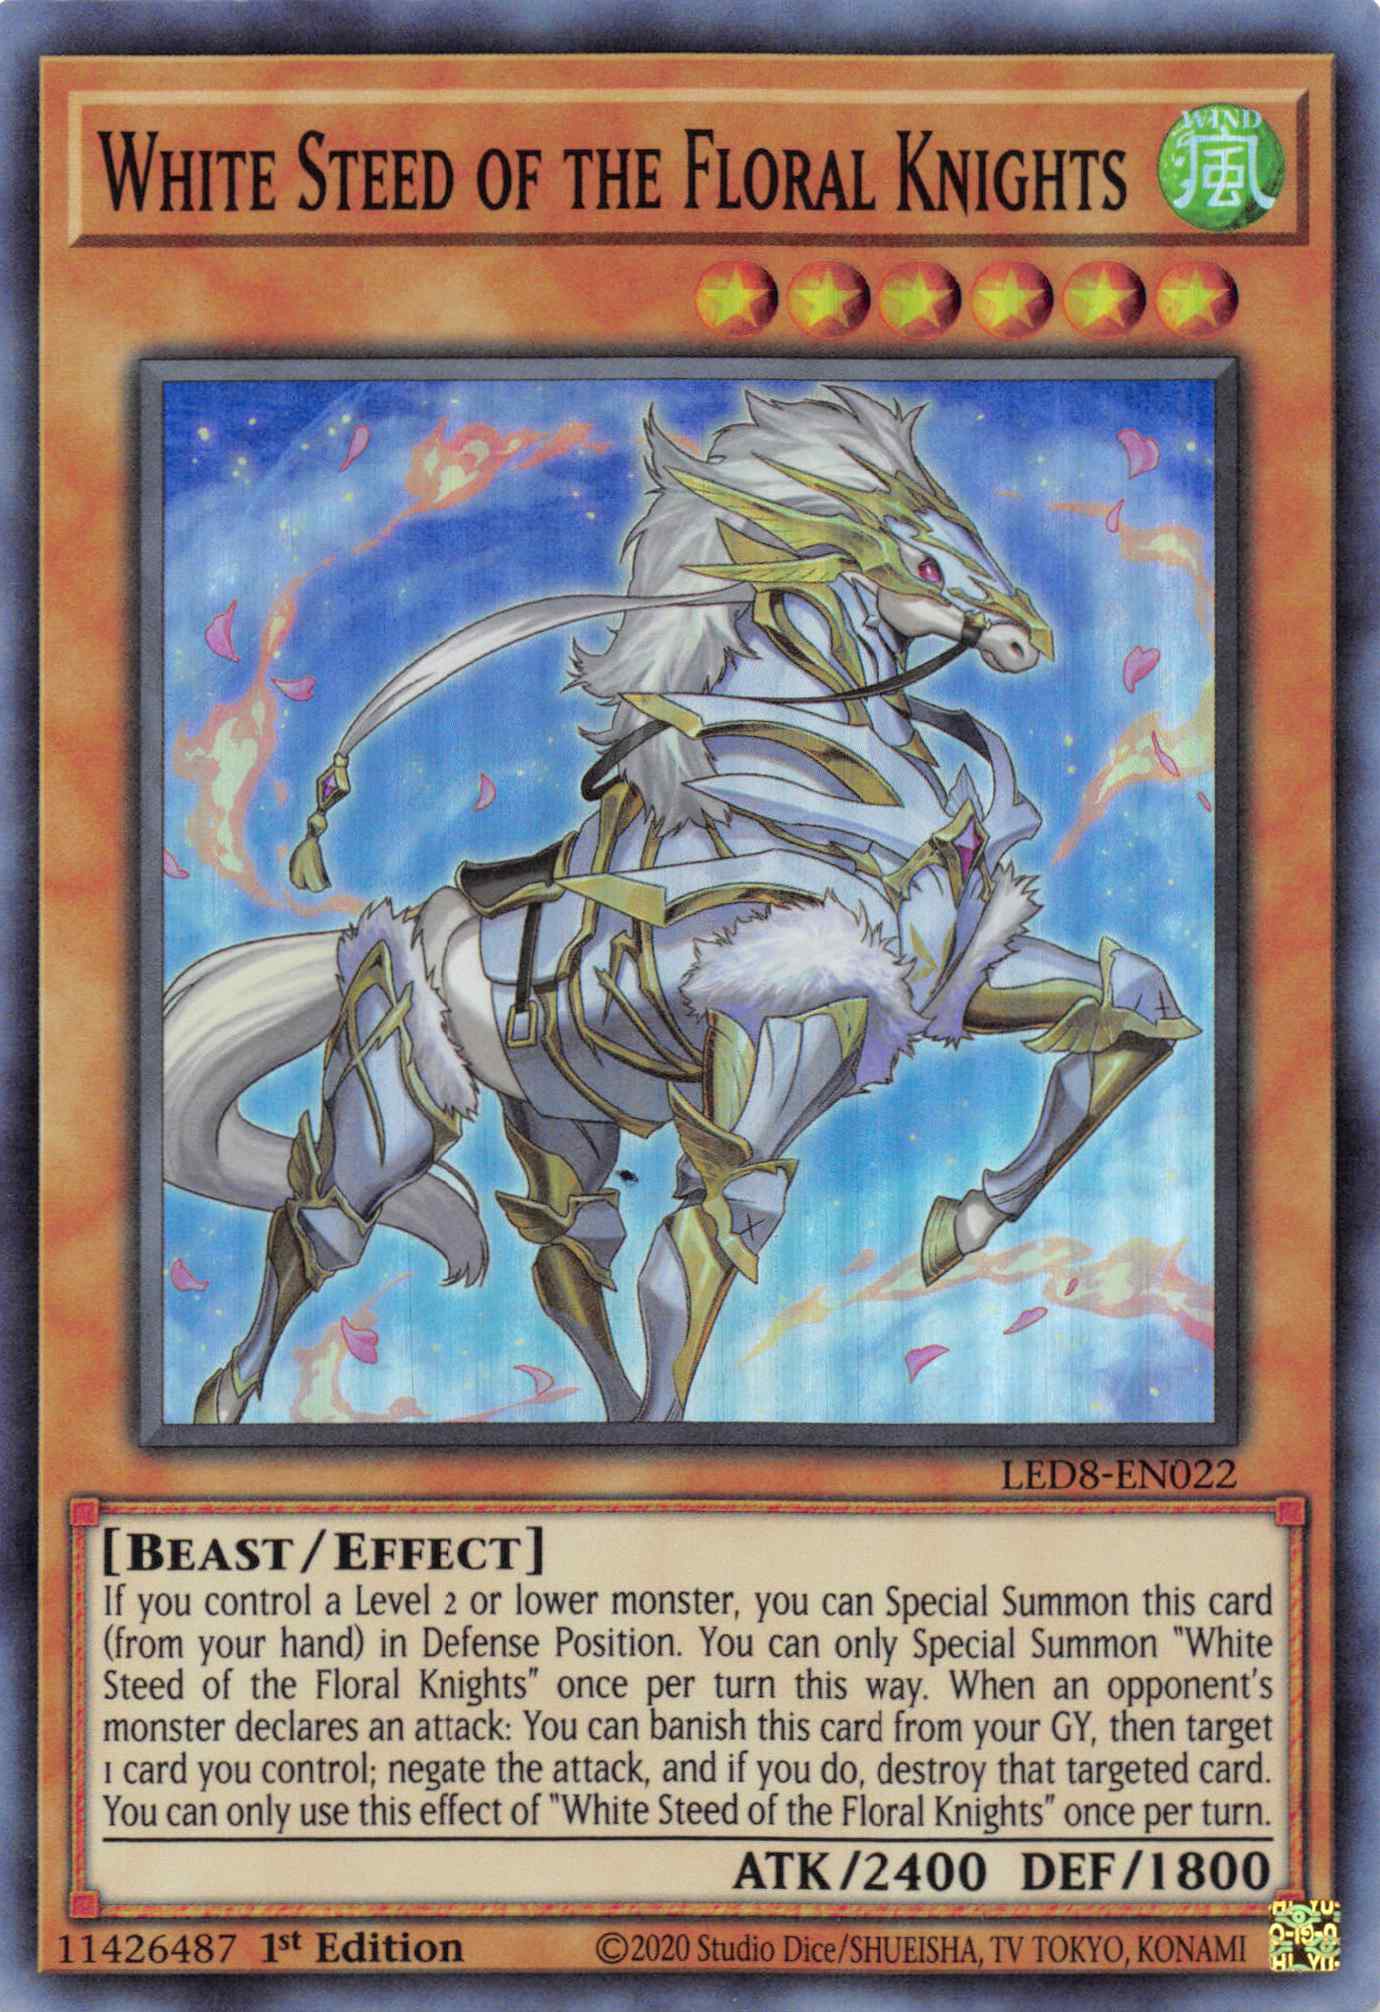 White Steed of the Floral Knights [LED8-EN022] Super Rare | Kessel Run Games Inc. 